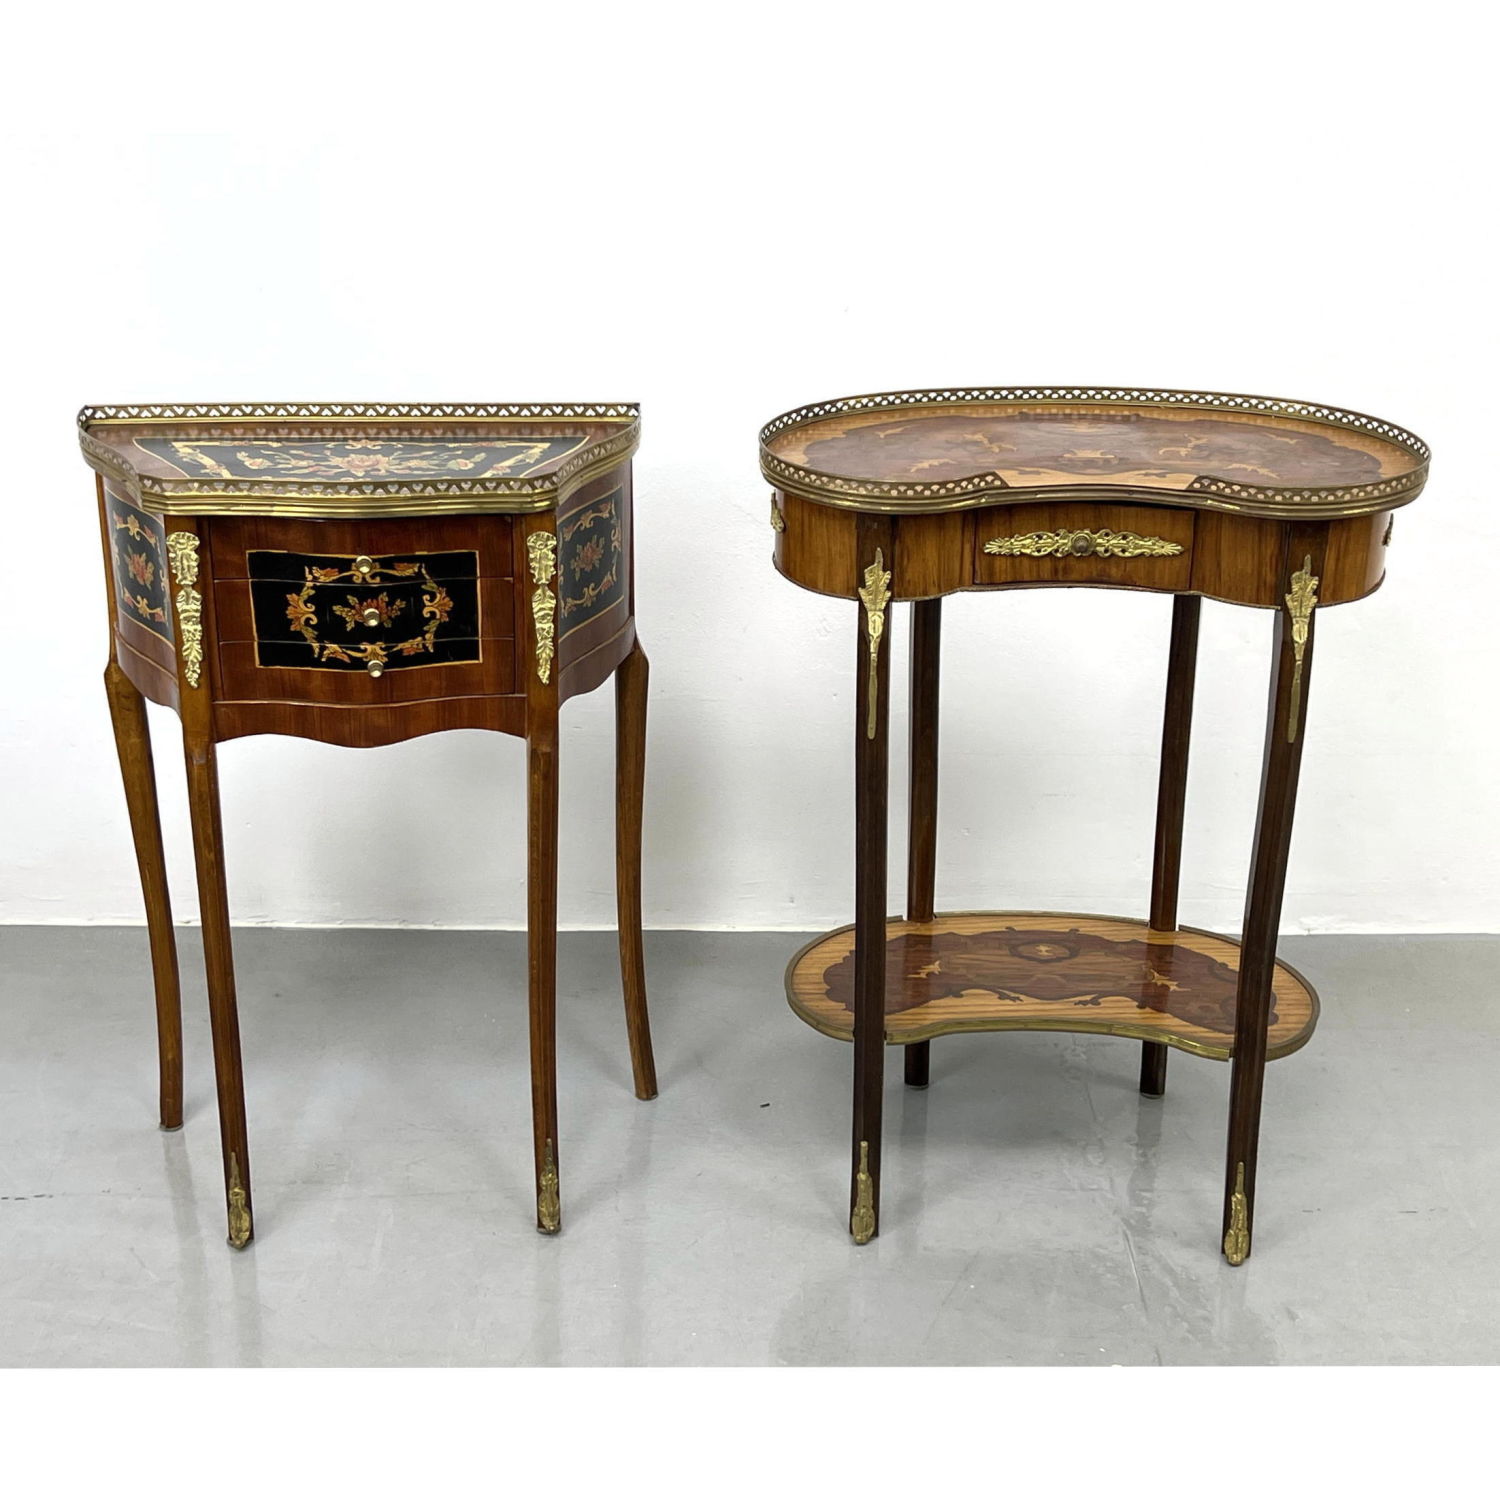 2pc French style Side Tables Stands.